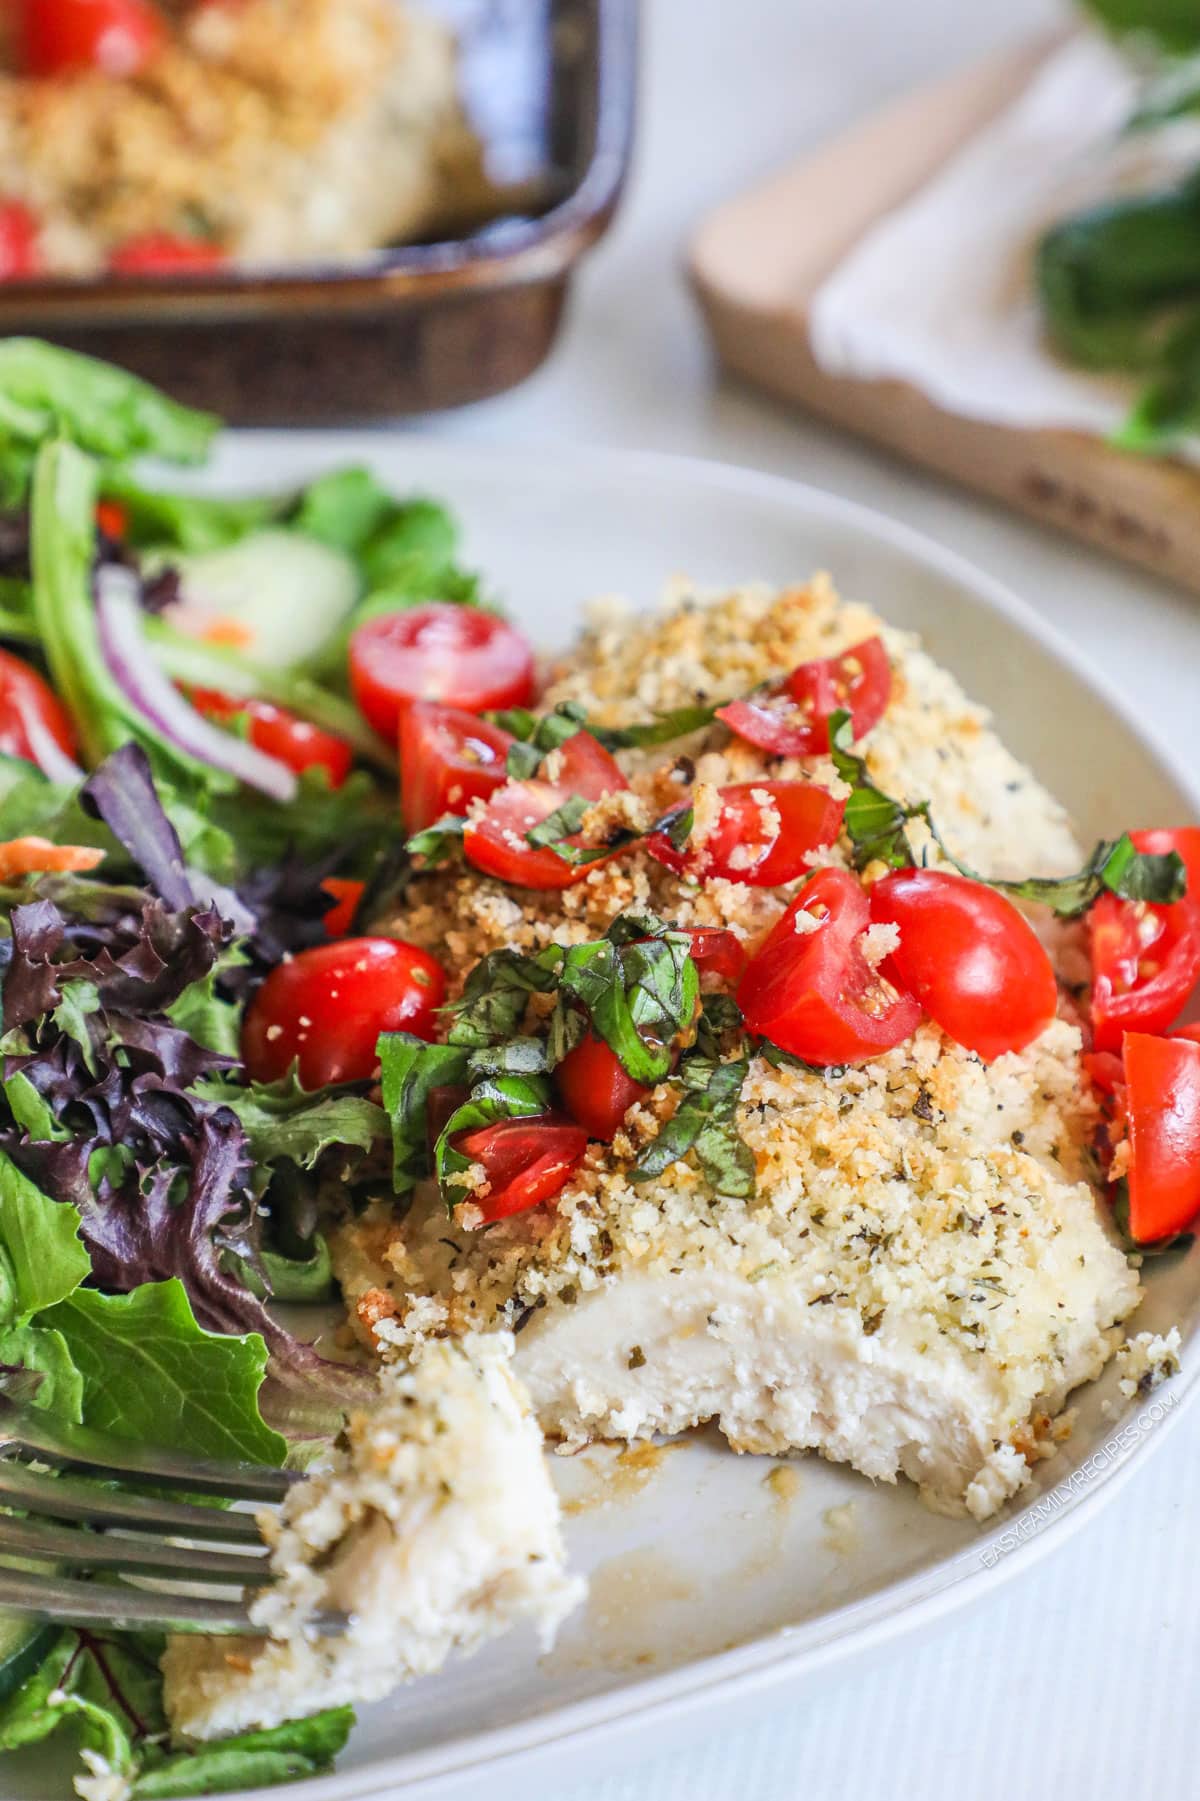 Juicy baked Italian chicken on plate with basil, tomatoes, and breadcrumbs